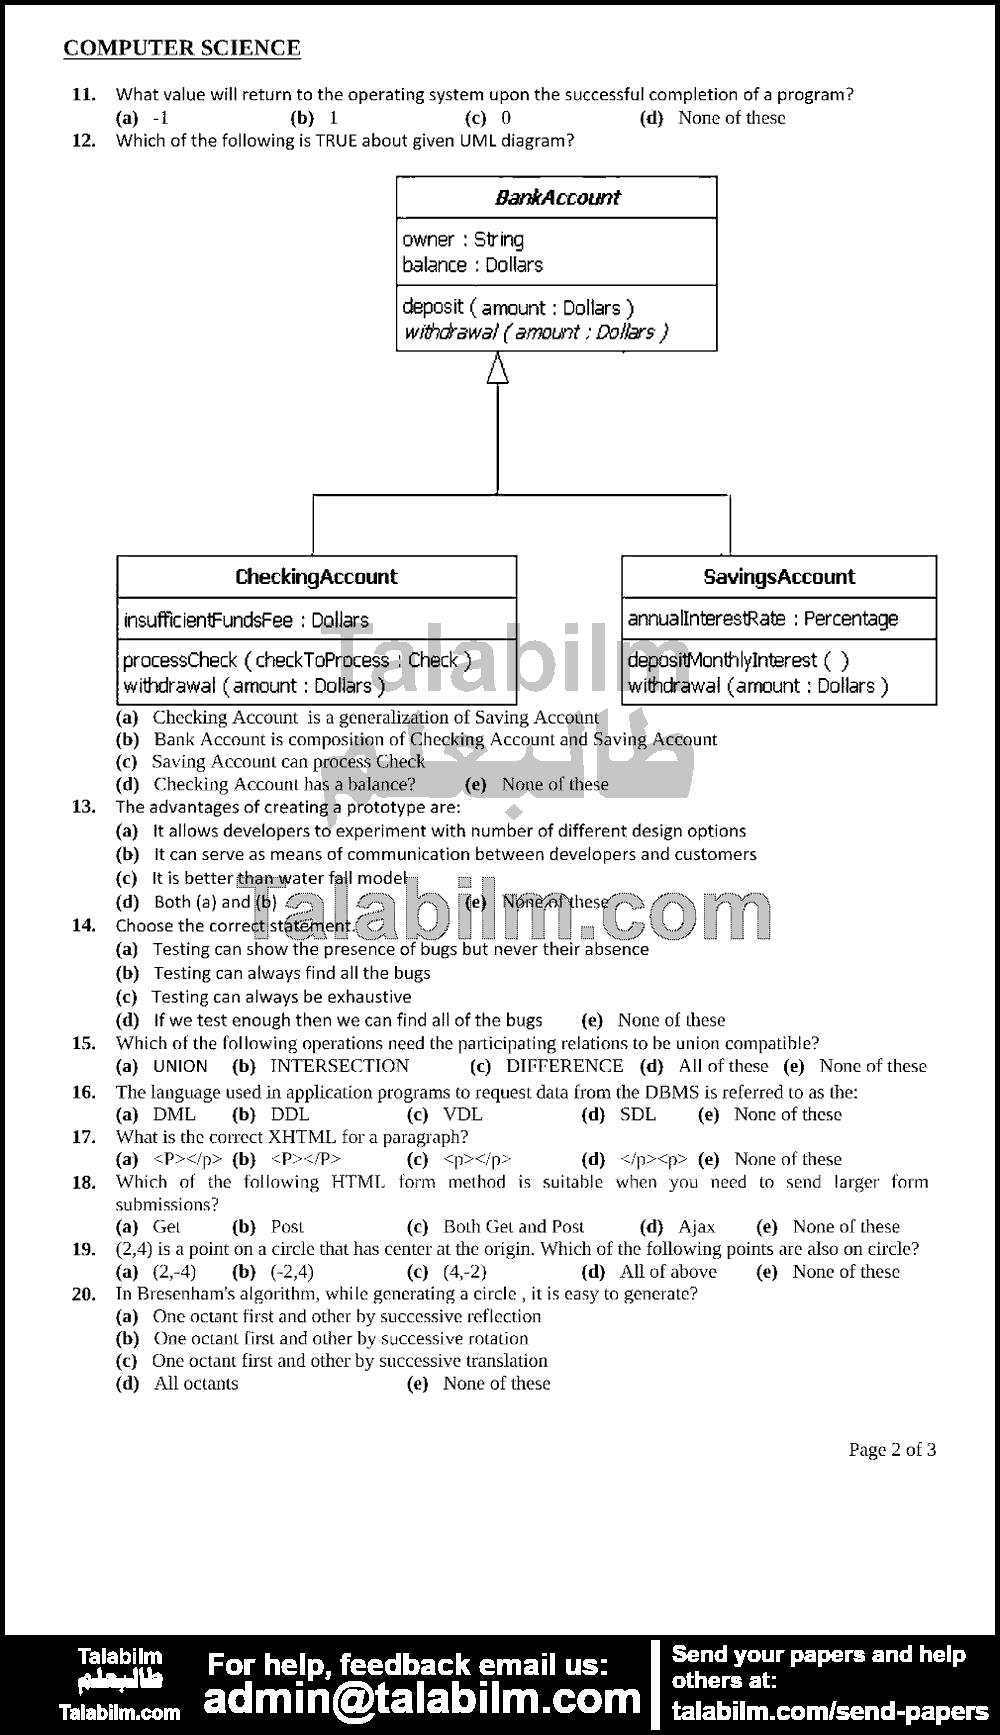 Computer Science 0 past paper for 2013 Page No. 2